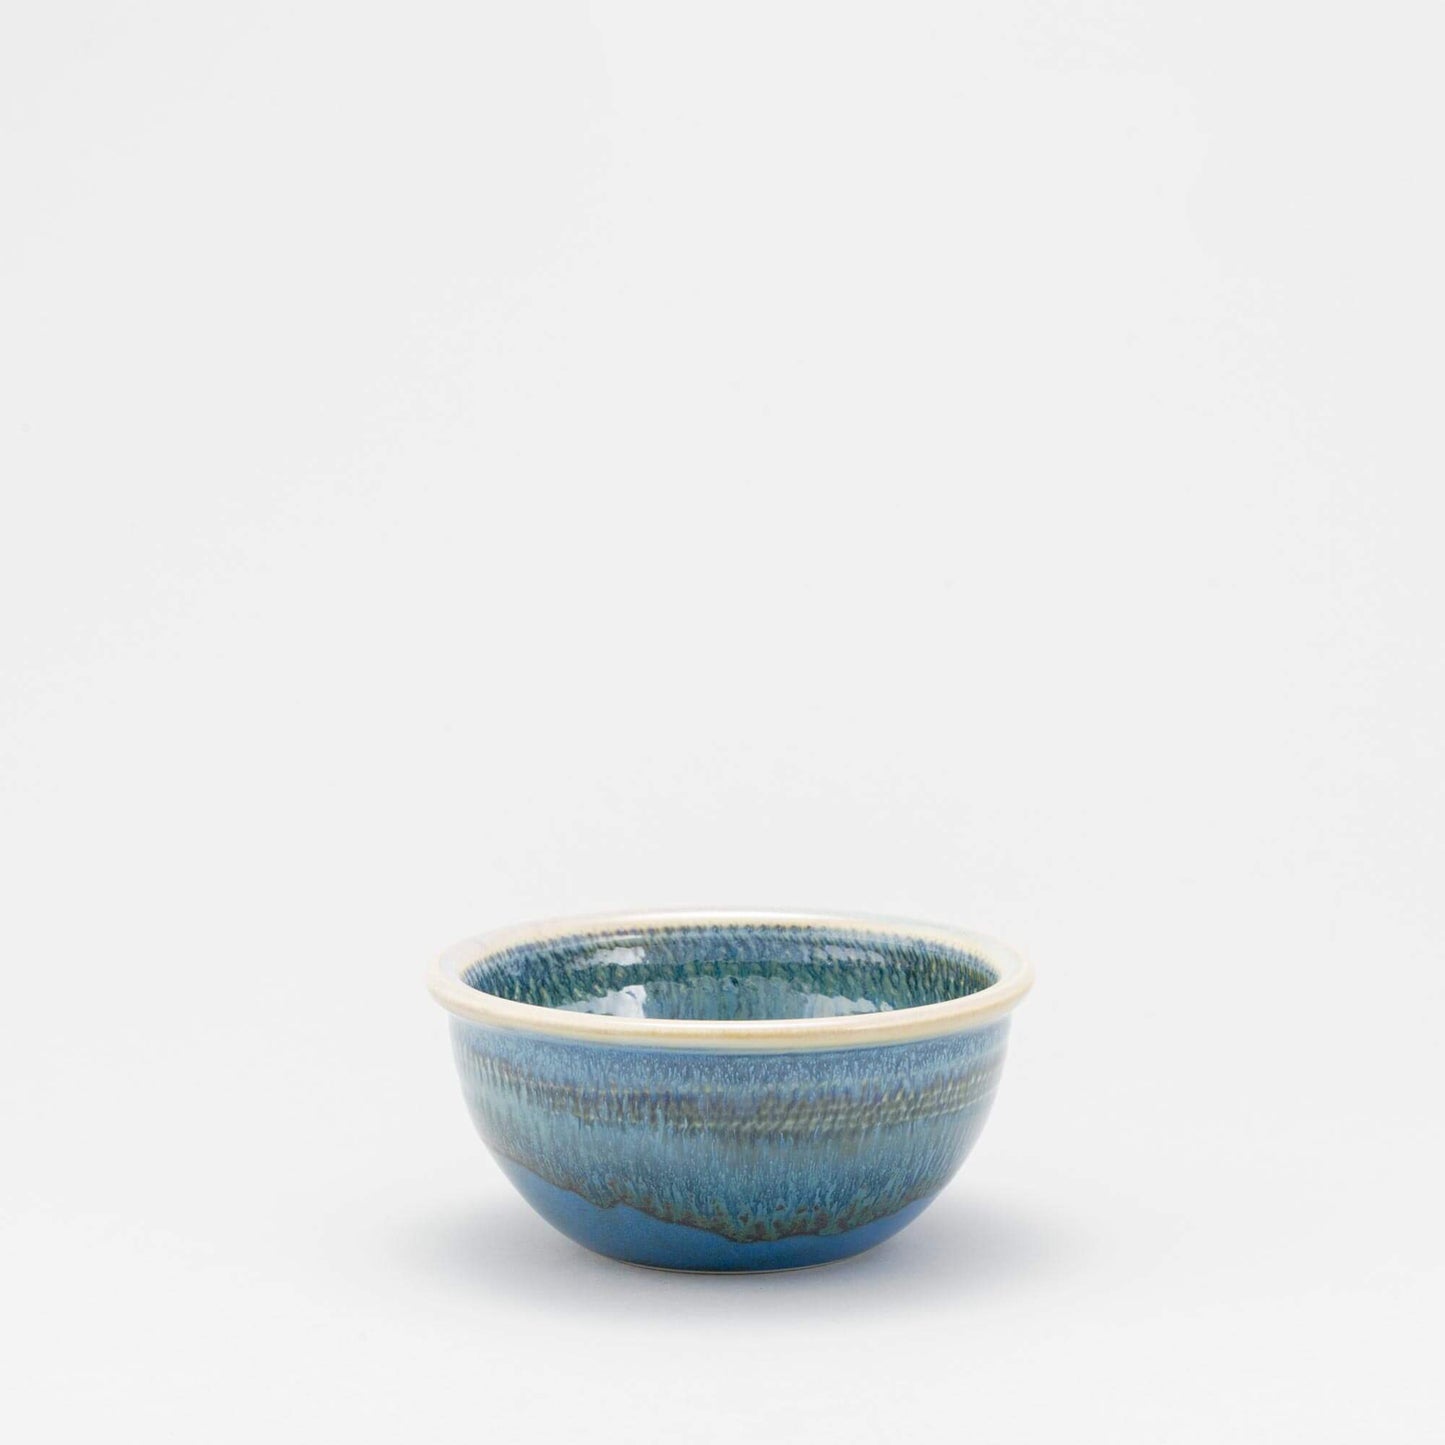 Handmade Pottery 6 Inch Mixing Bowl in Blue Oribe pattern made by Georgetown Pottery in Maine